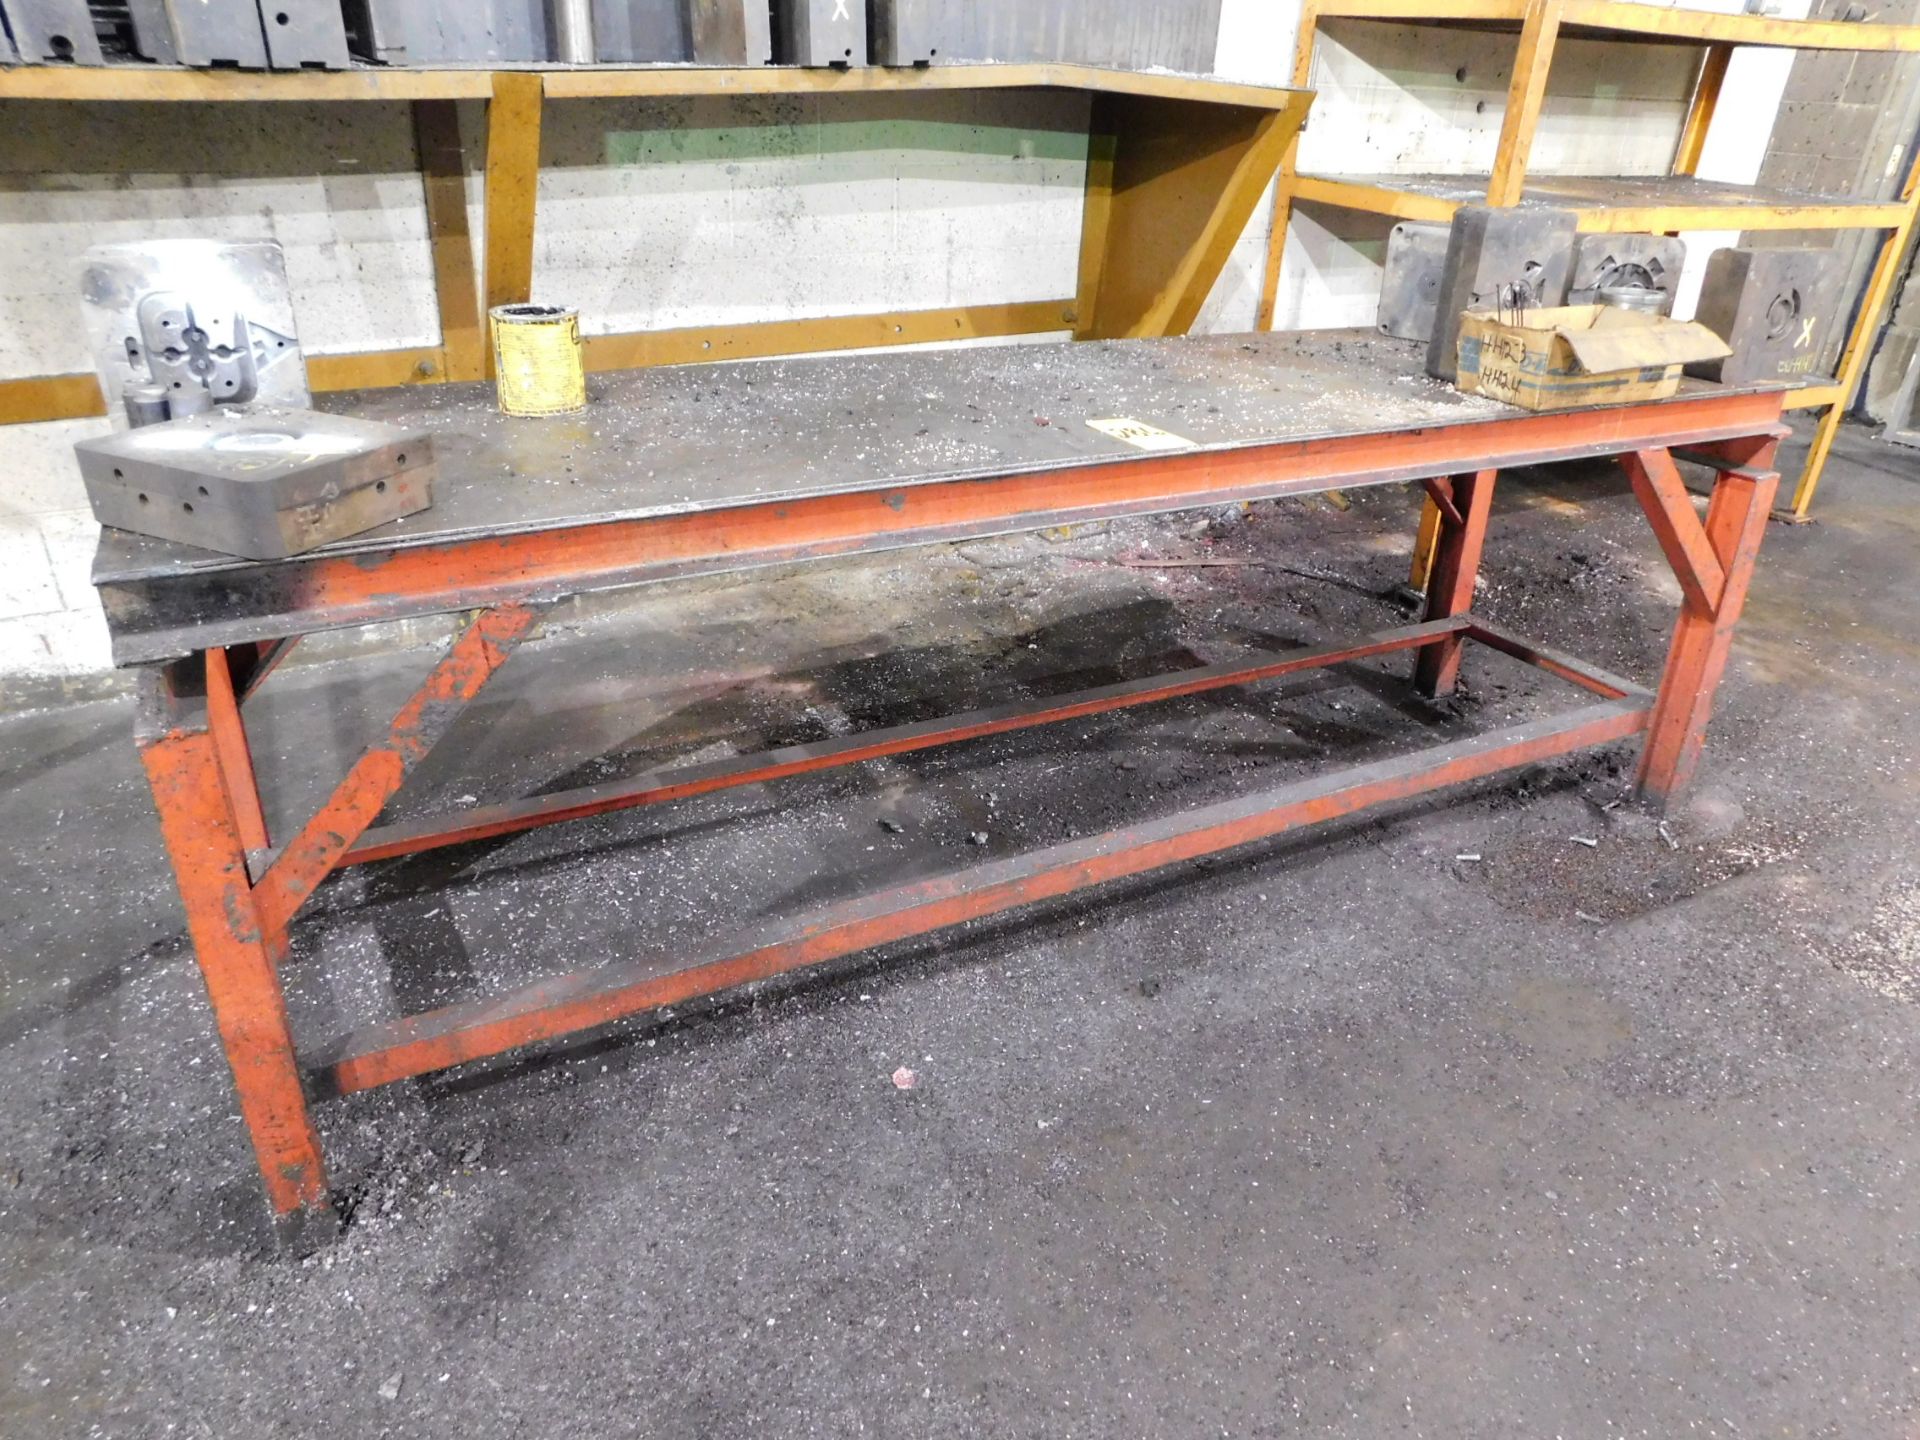 Steel Workbench, No Contents, 26" X 96" X 33" High